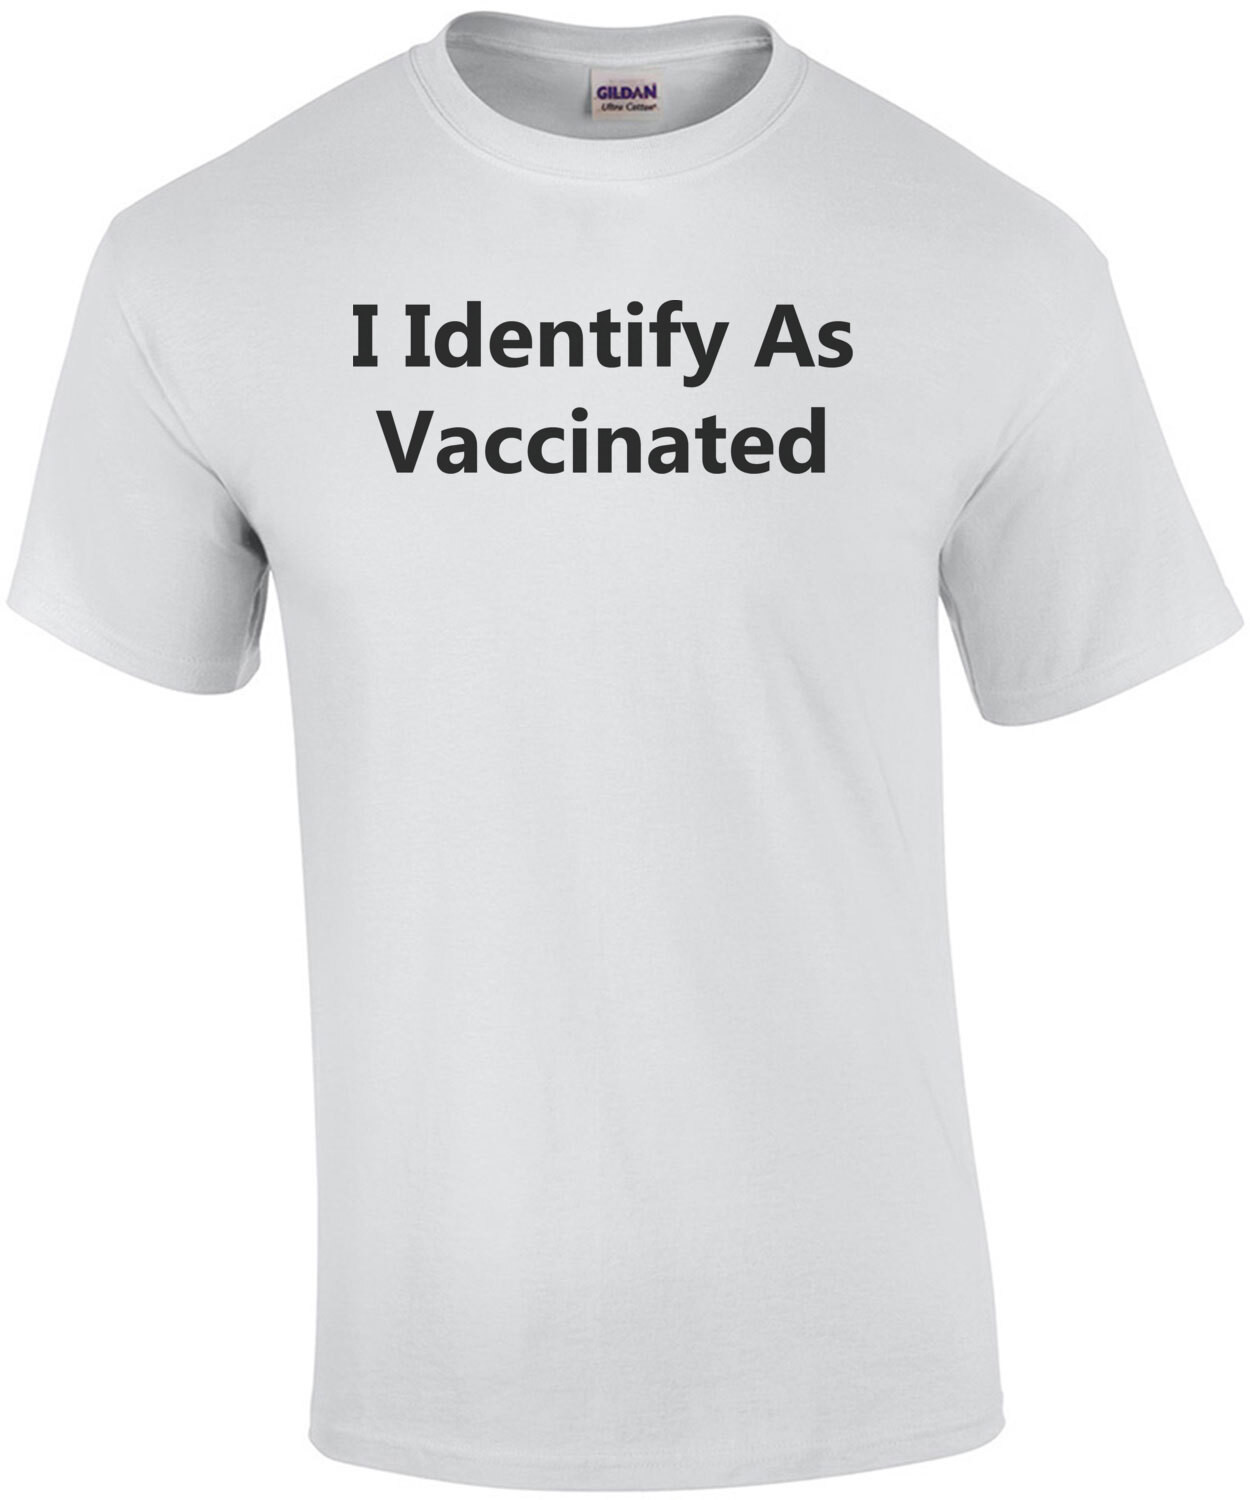 I Identify As Vaccinated Funny Shirt